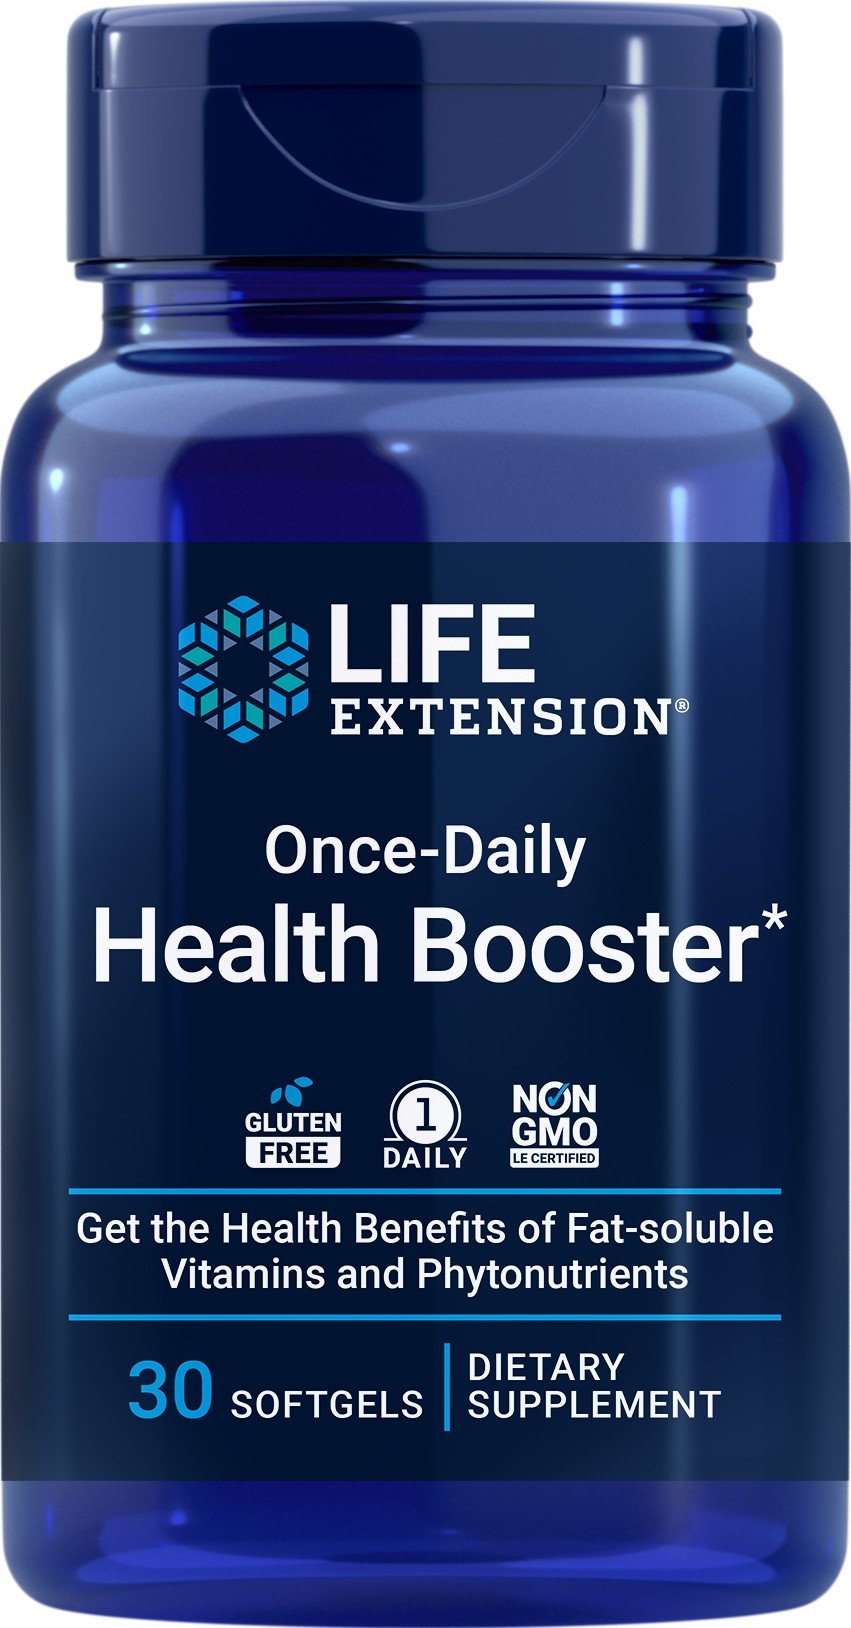 Life Extension Once-Daily Health Booster 30 Softgel